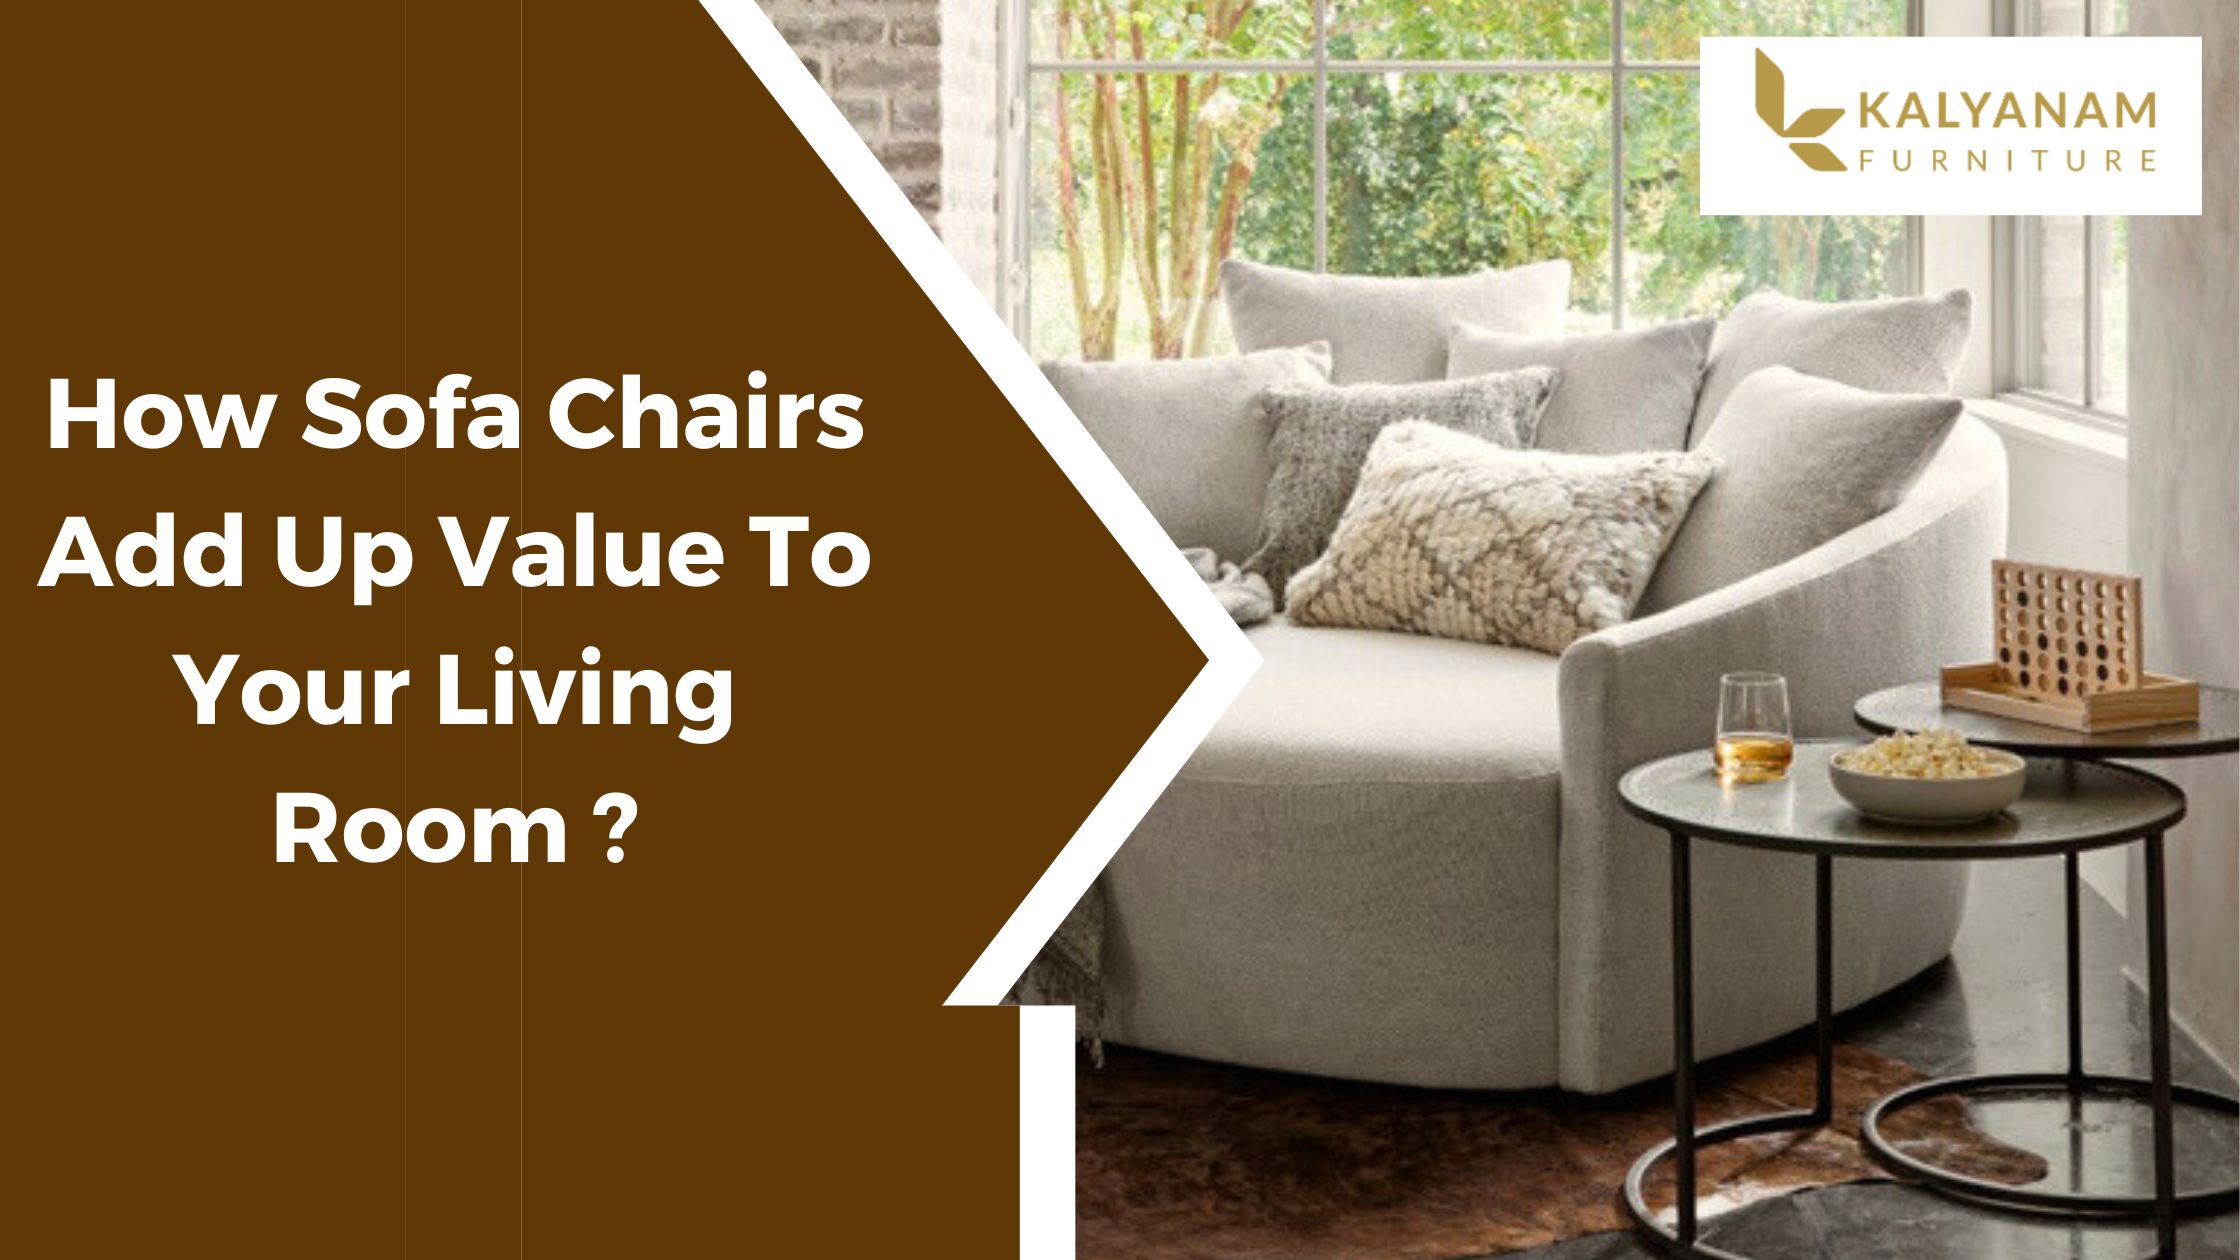 How Sofa Chairs add up value to your Living Room